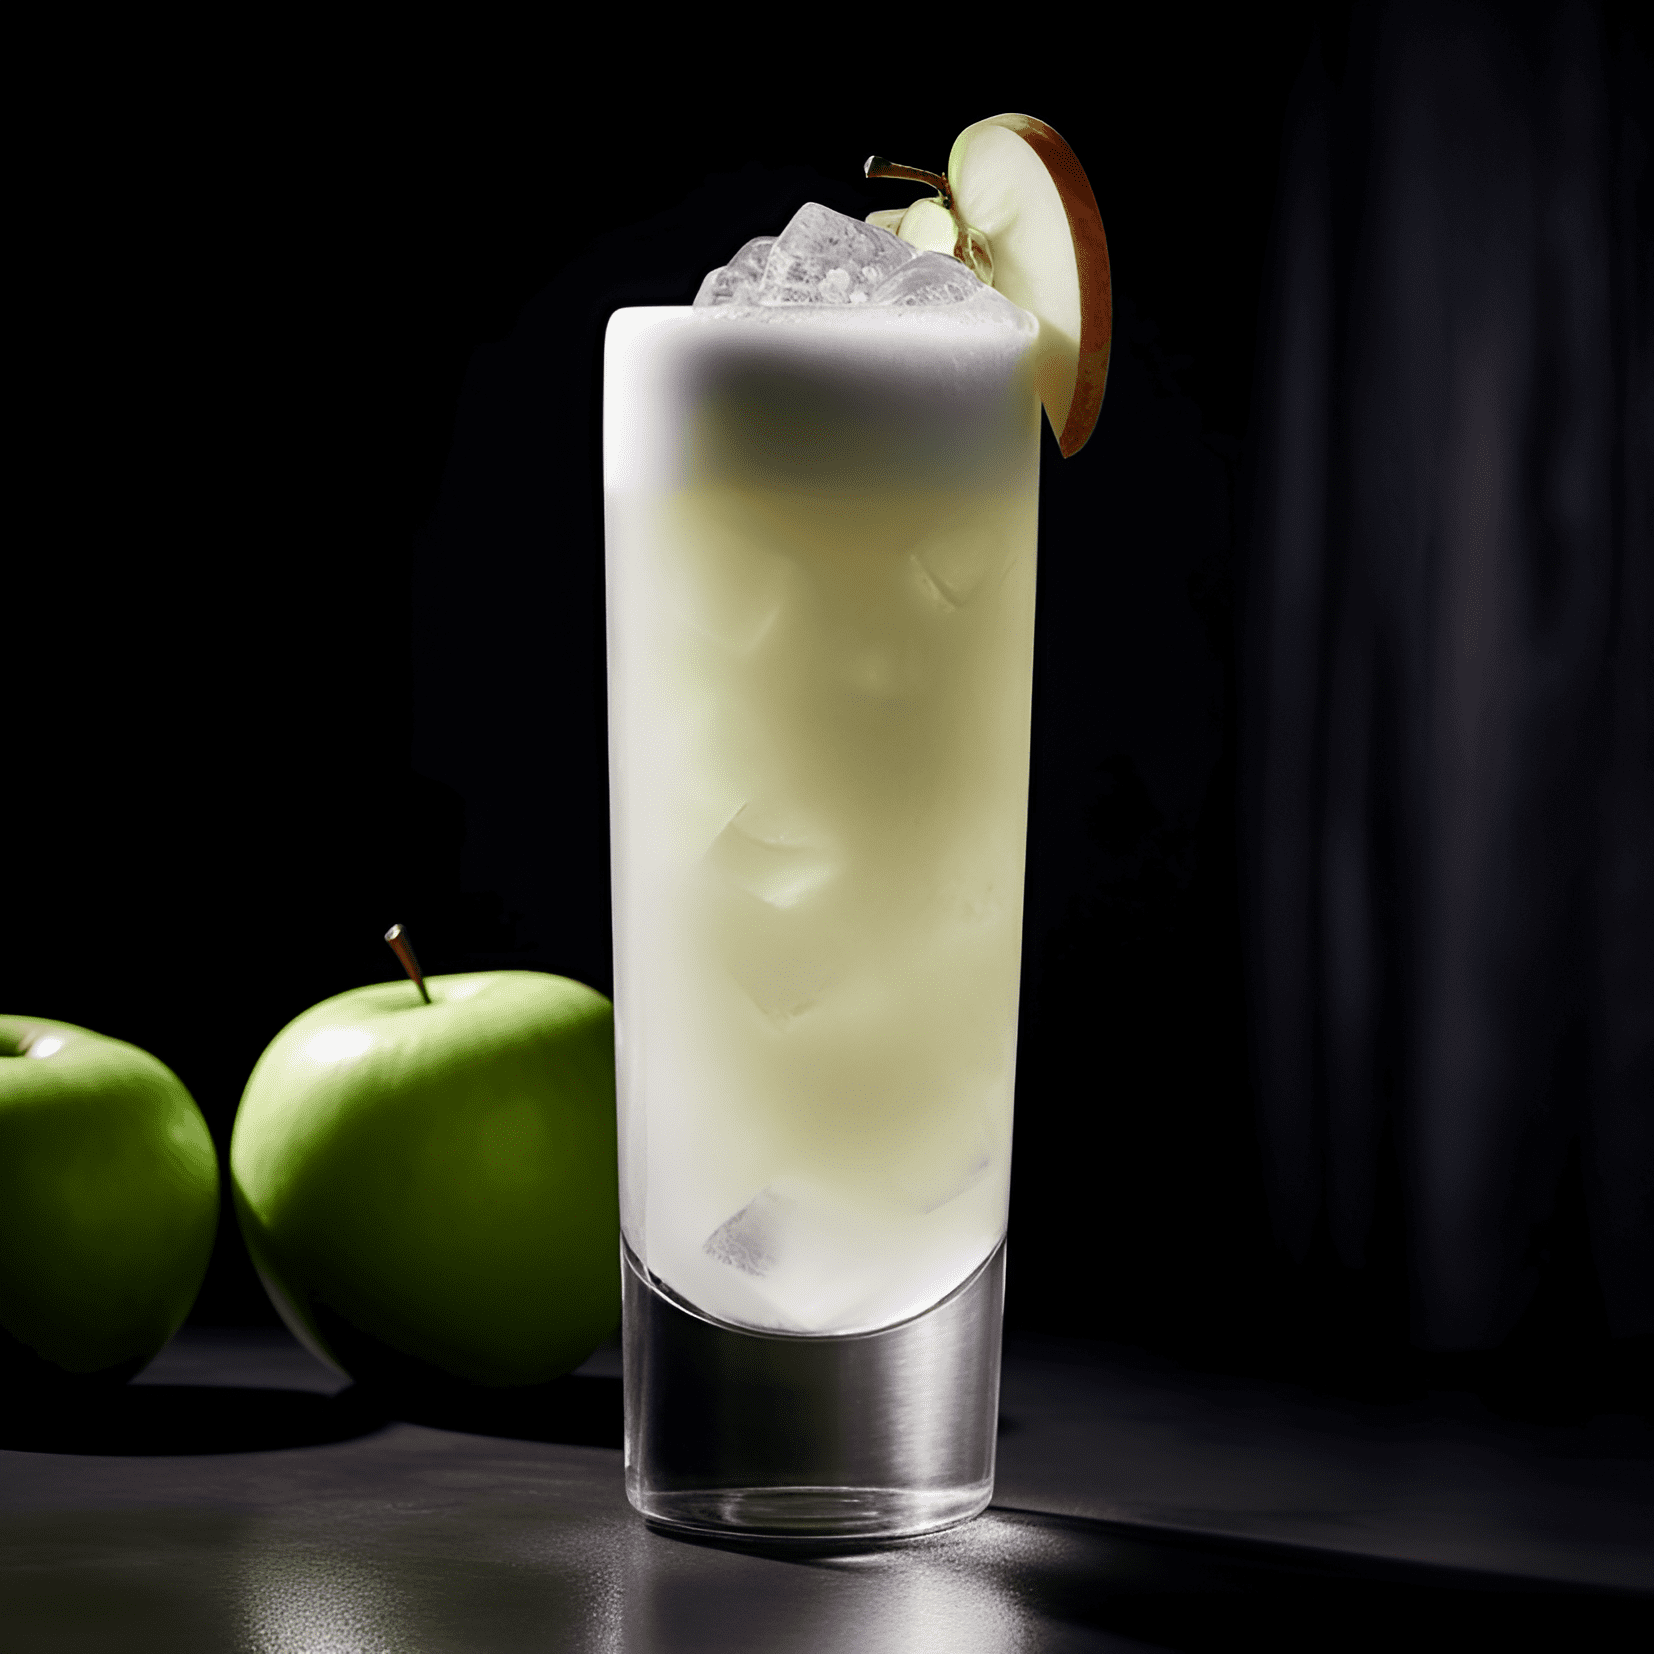 Apple Blow Fizz Cocktail Recipe - The Apple Blow Fizz has a delightful balance of sweet, tart, and slightly spicy flavors. The apple and lemon juices provide a refreshing and tangy base, while the cinnamon syrup adds a touch of warmth and sweetness. The gin and egg white give the cocktail a smooth and creamy texture, while the soda water adds a light and fizzy finish.